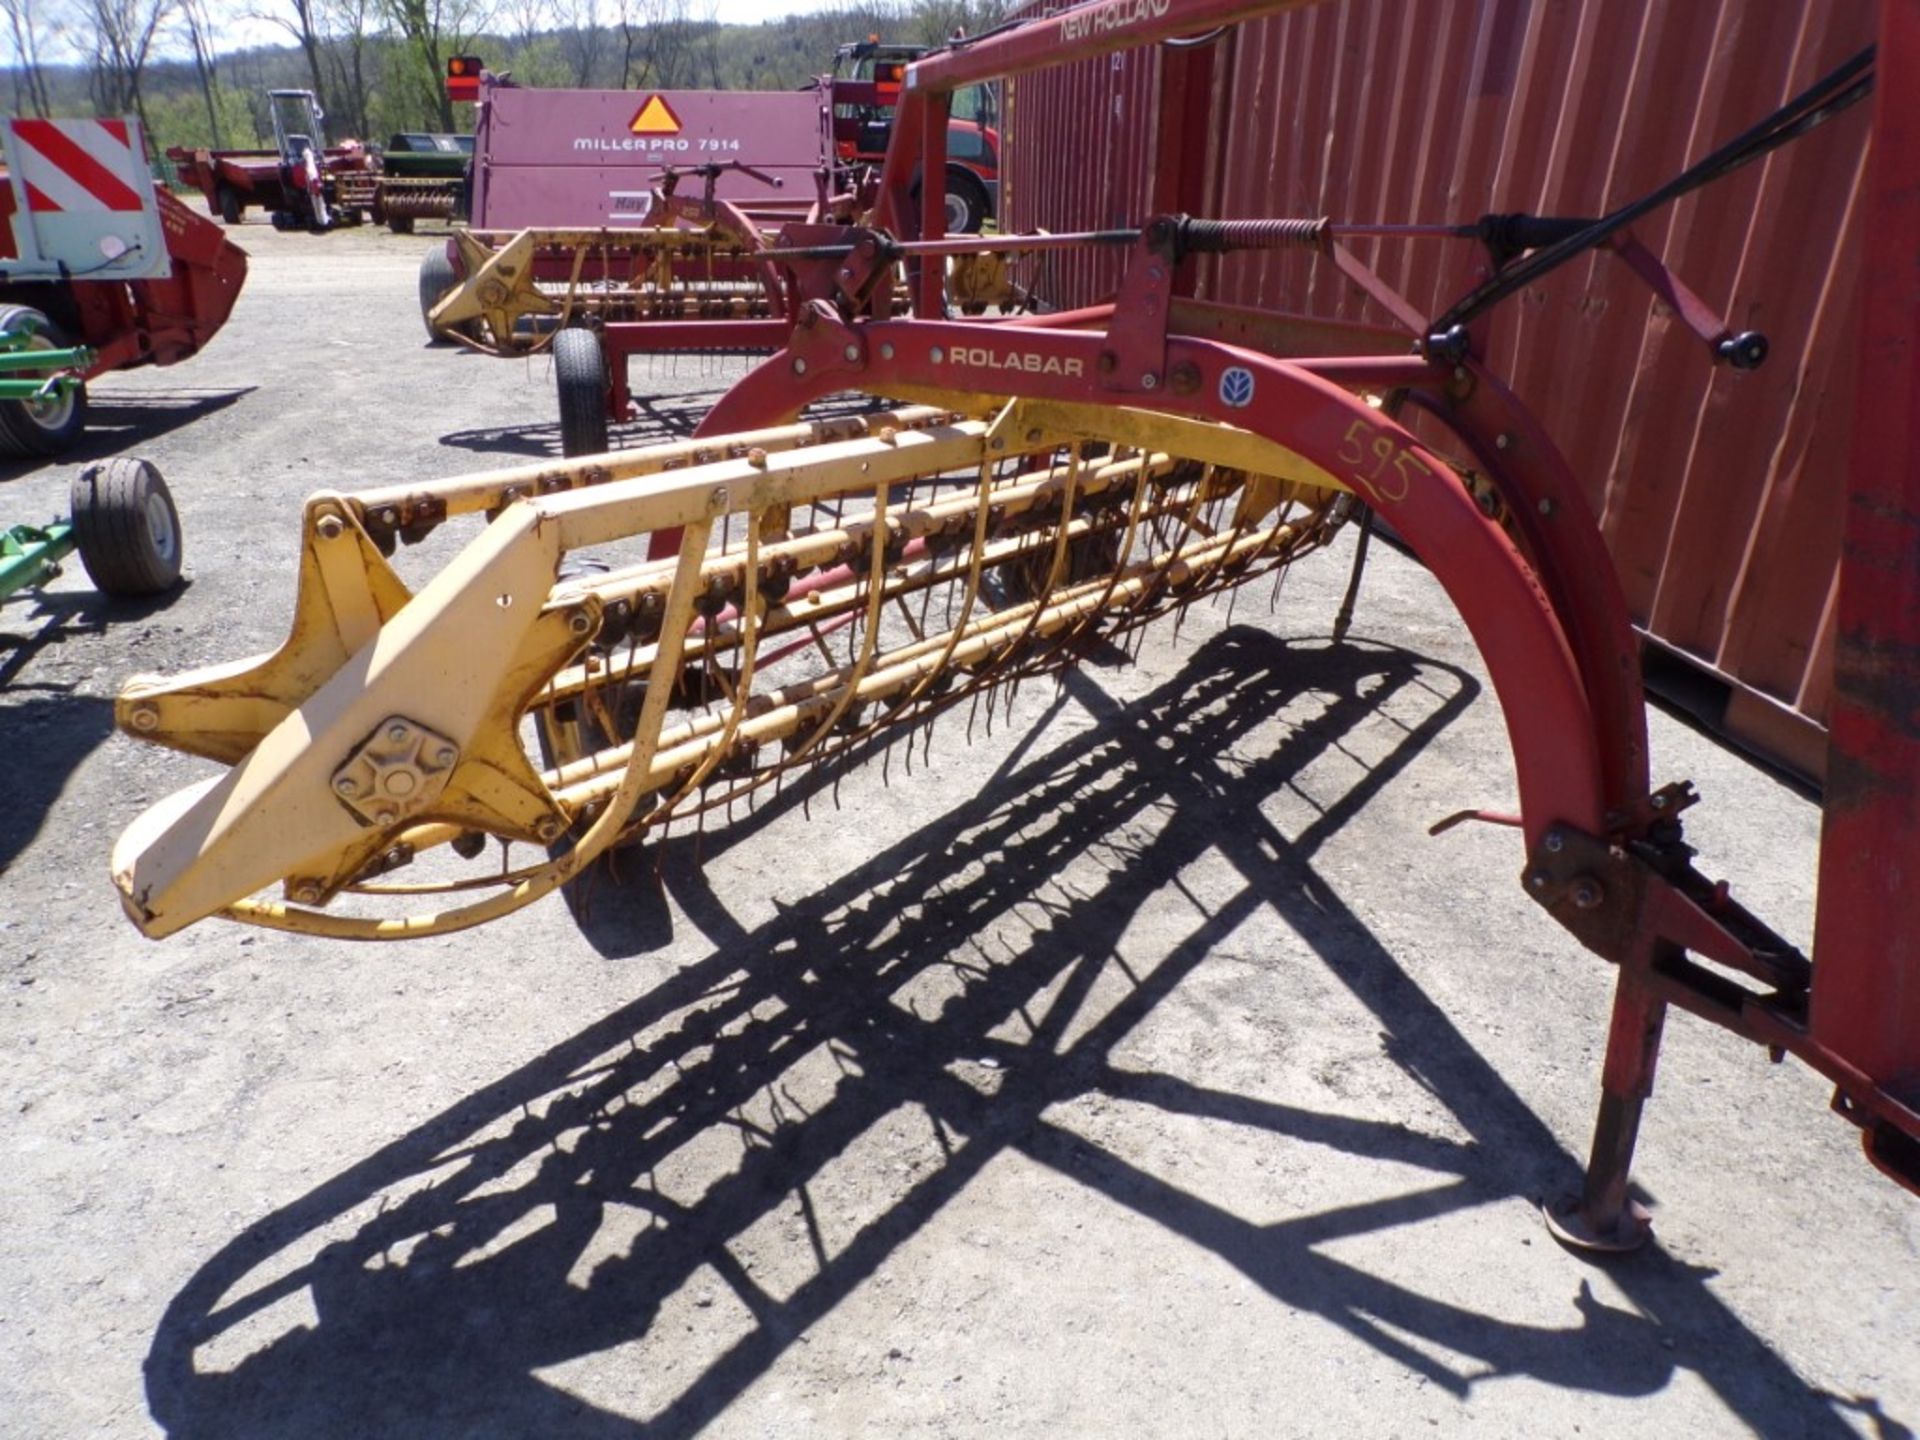 New Holland 258 Rake, HITCH HAS BEEN WELDED, Late Model, Rubber Teeth, Good Condition, Ser.# 1063712